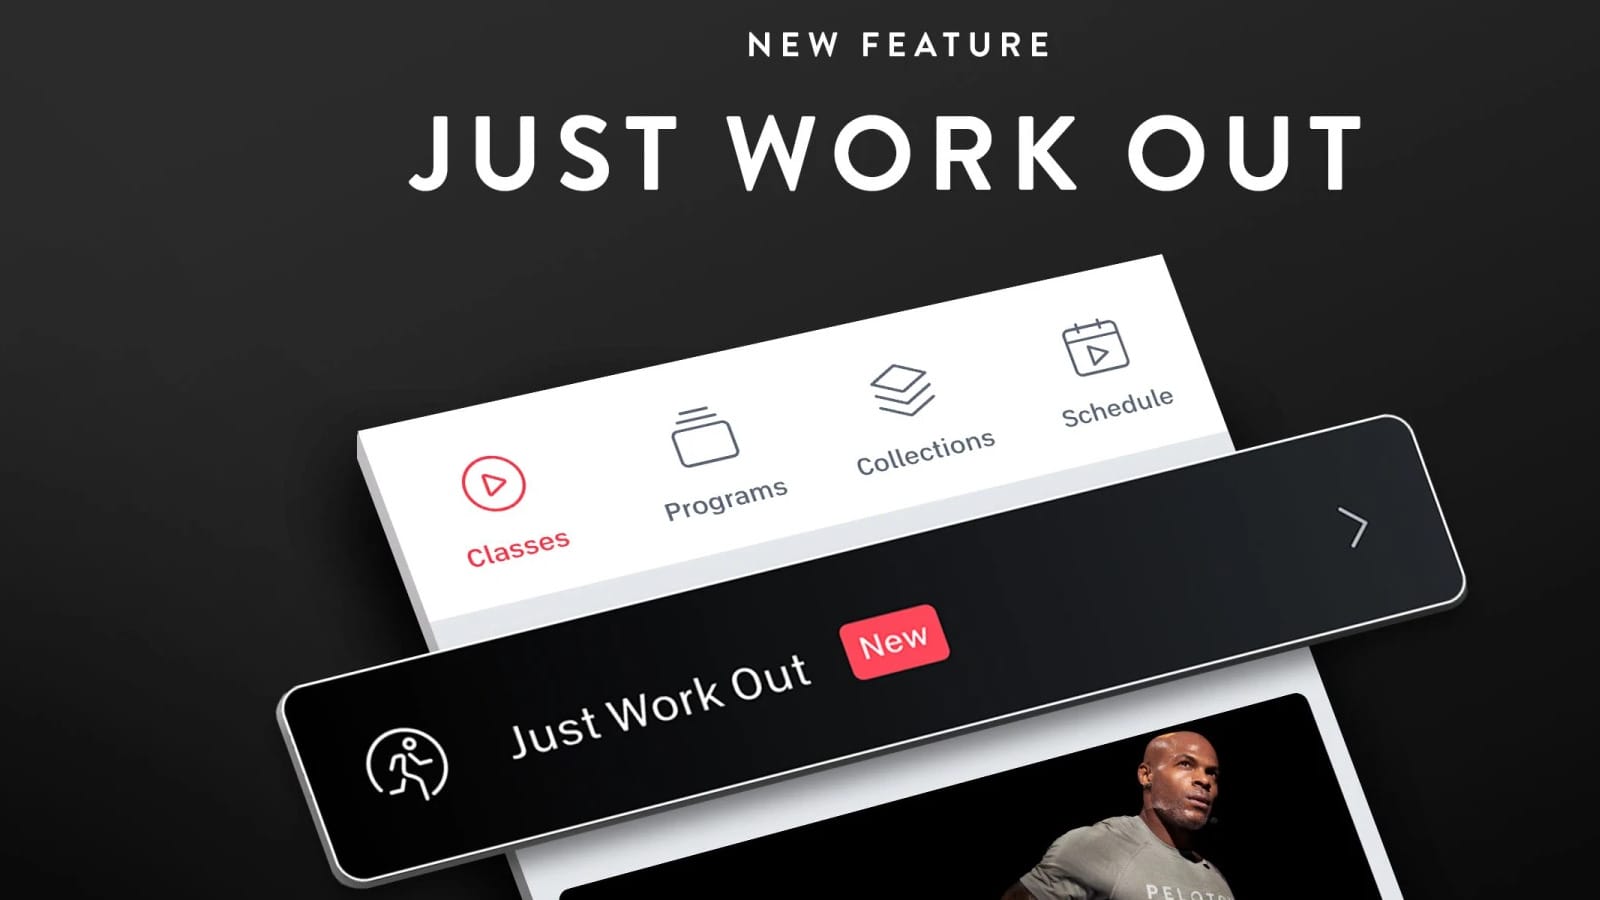 Post from Peloton advertising the original launch of the "Just Work Out" feature.